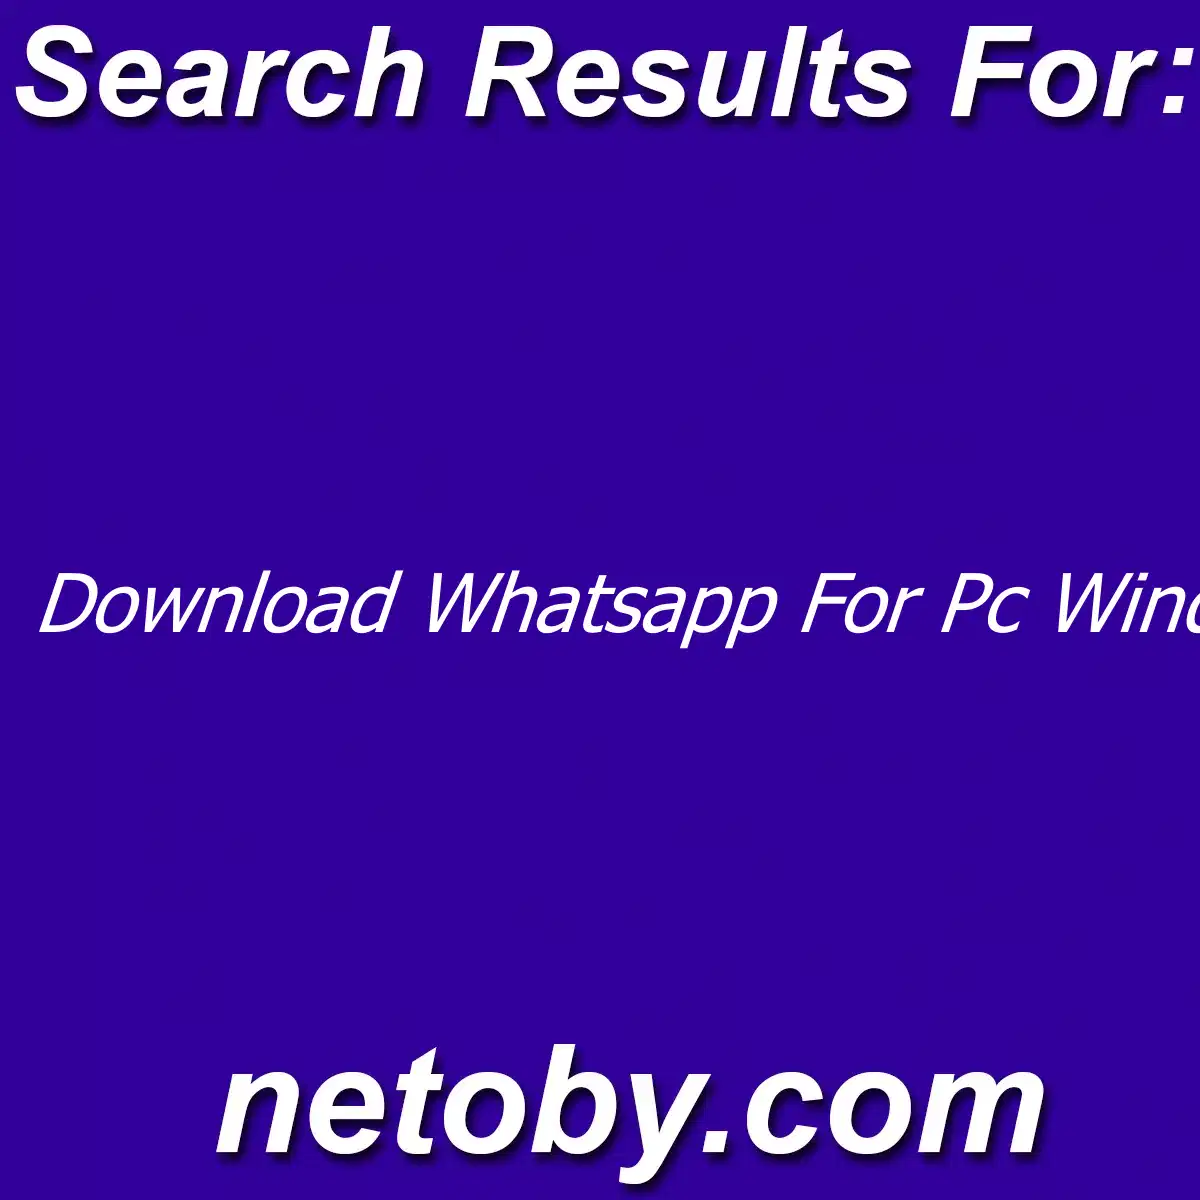 ﻿Download Whatsapp For Pc Windows 7